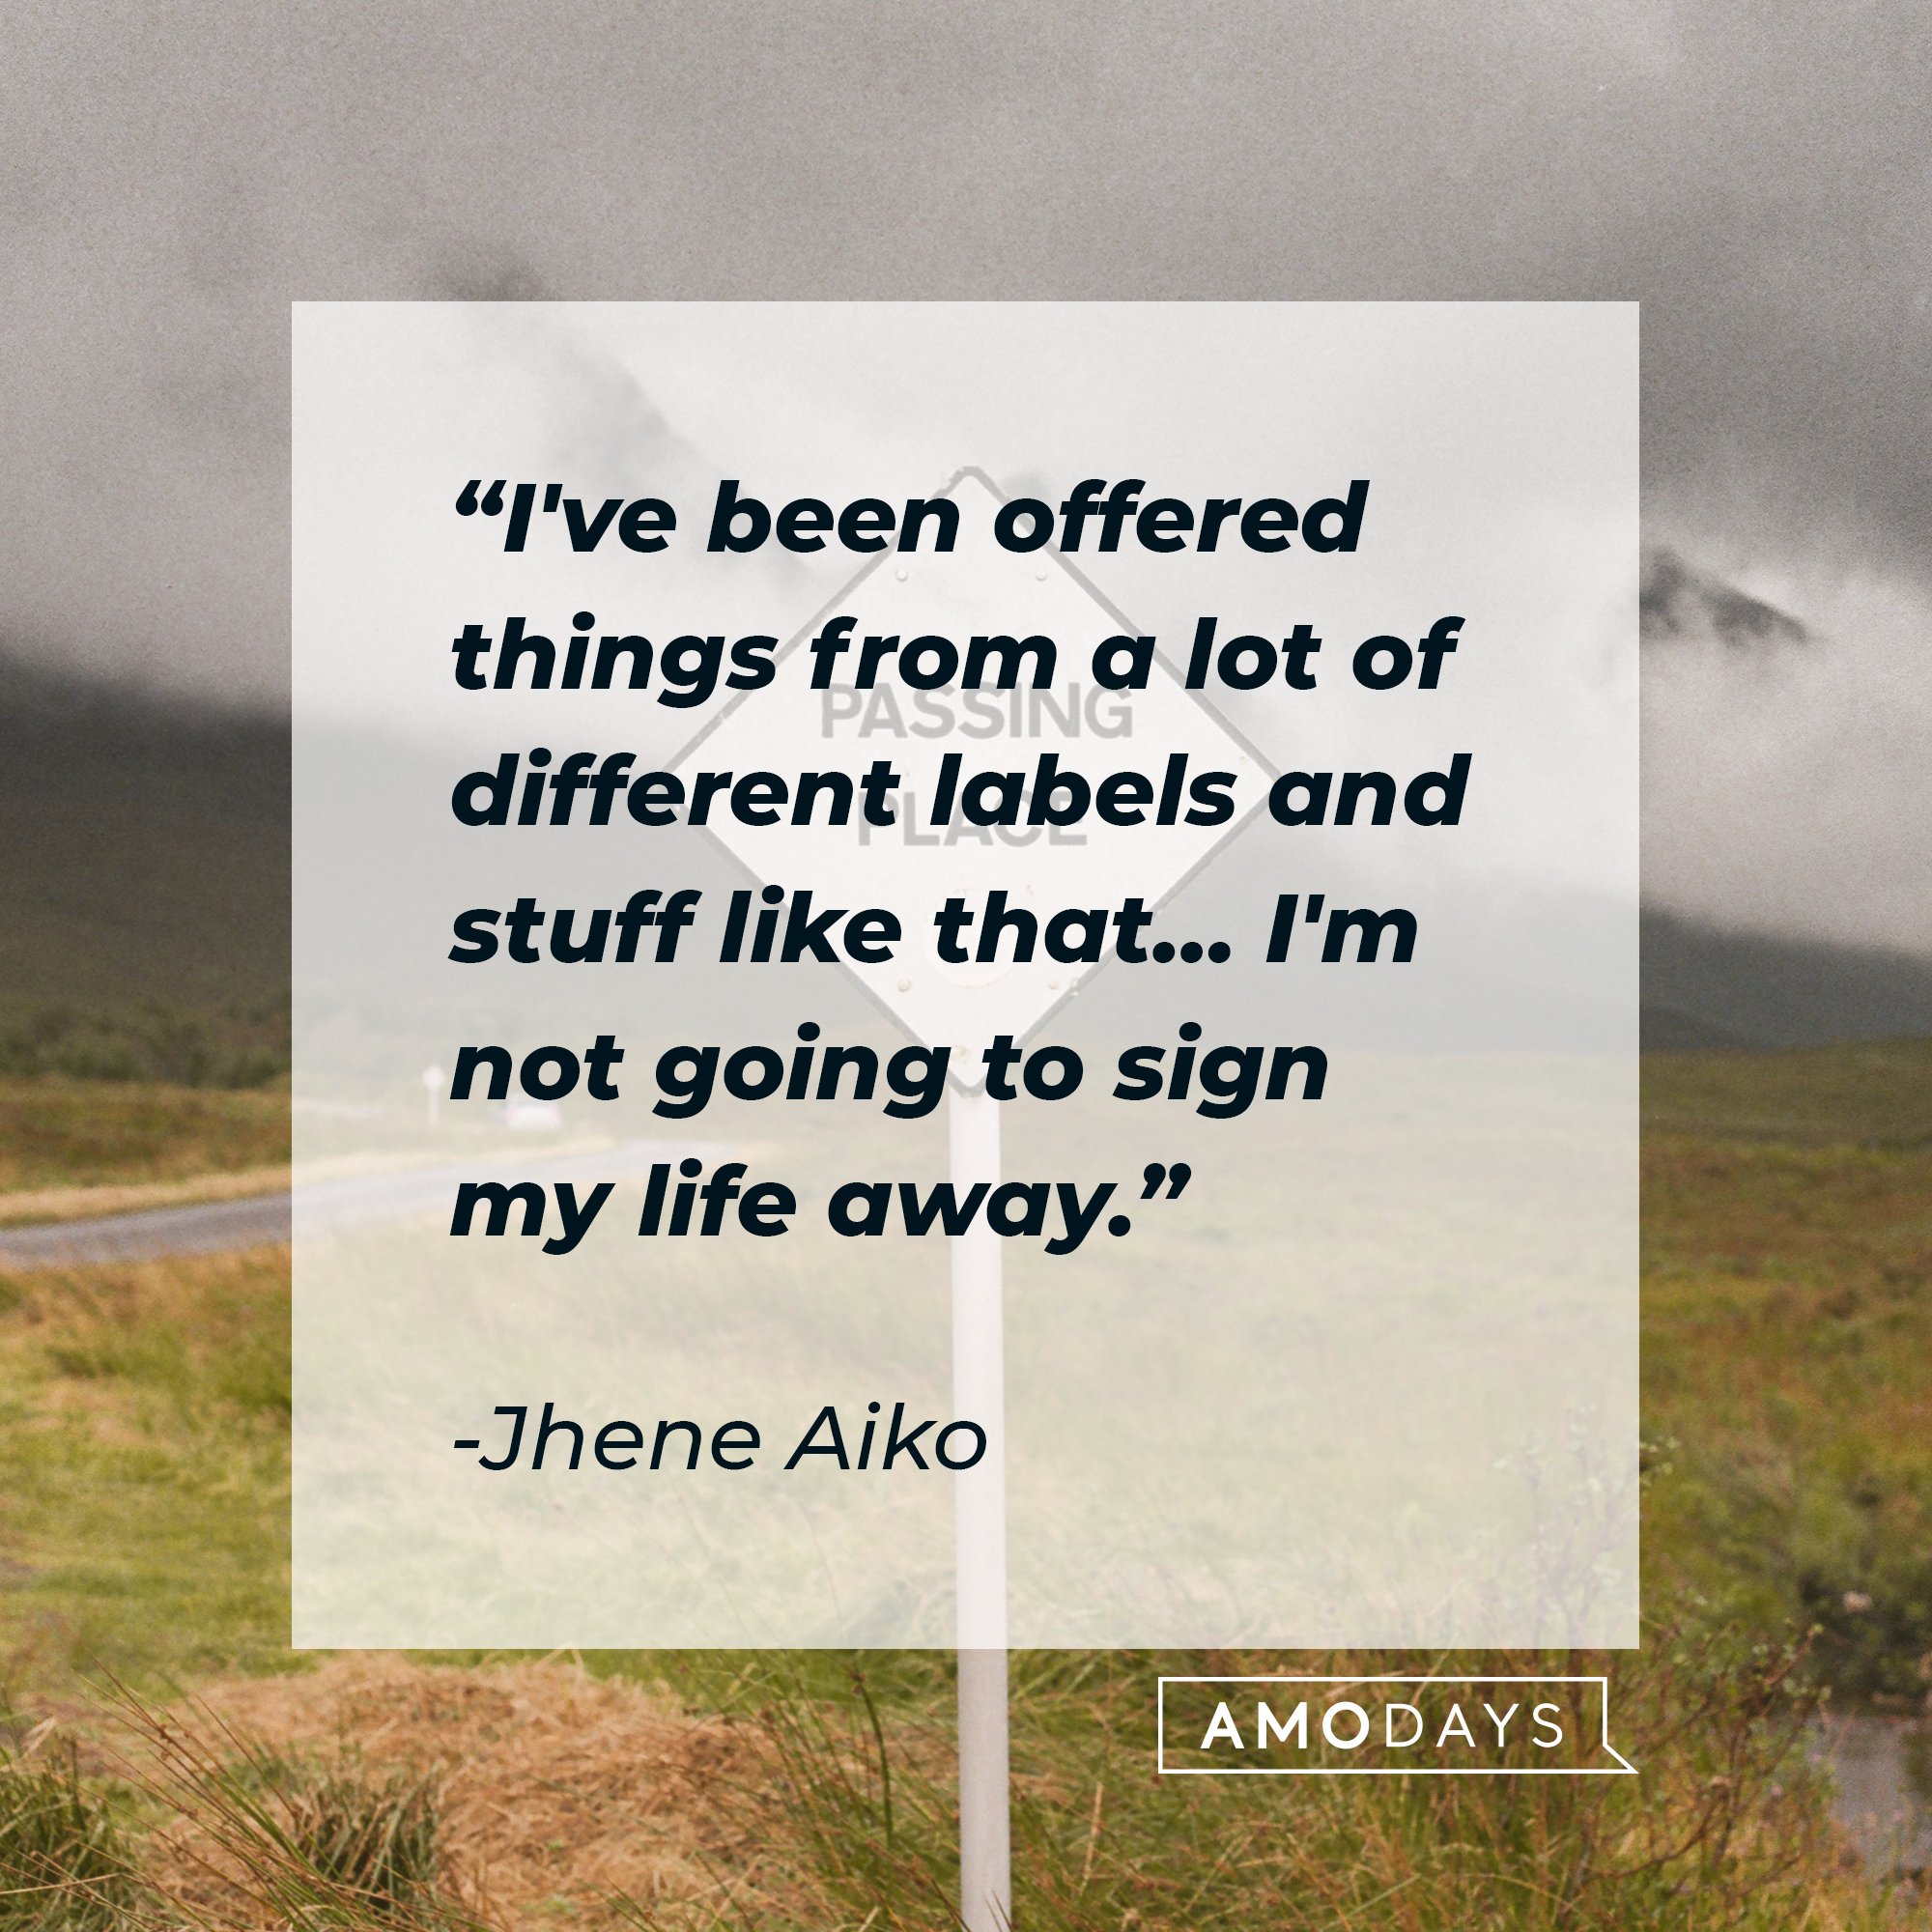  Jhene Aiko's quote: "I've been offered things from a lot of different labels and stuff like that… I'm not going to sign my life away." | Image: AmoDays